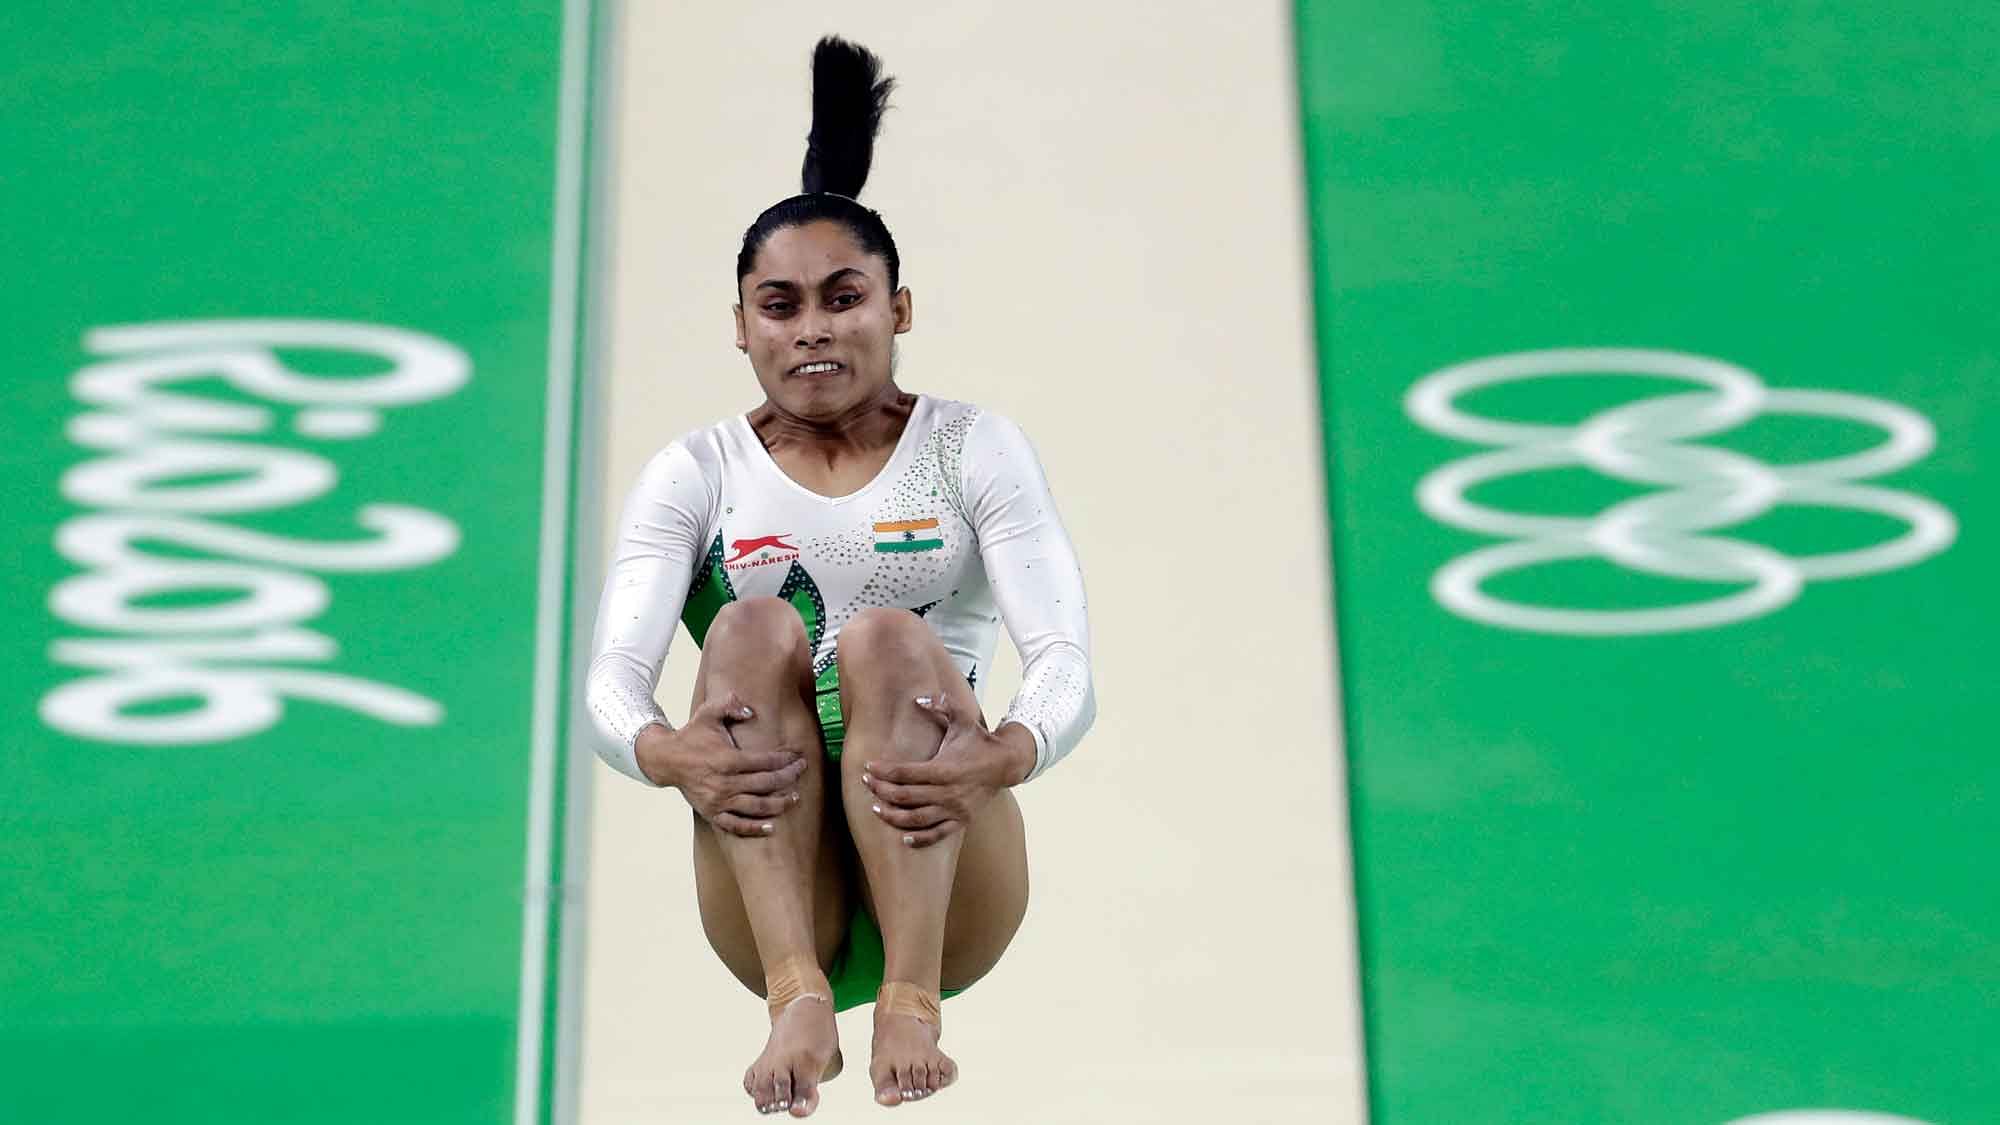 India’s Dipa Karmakar performs on the vault during the artistic gymnastics women’s qualification at the 2016 Summer Olympics. (Photo: AP)